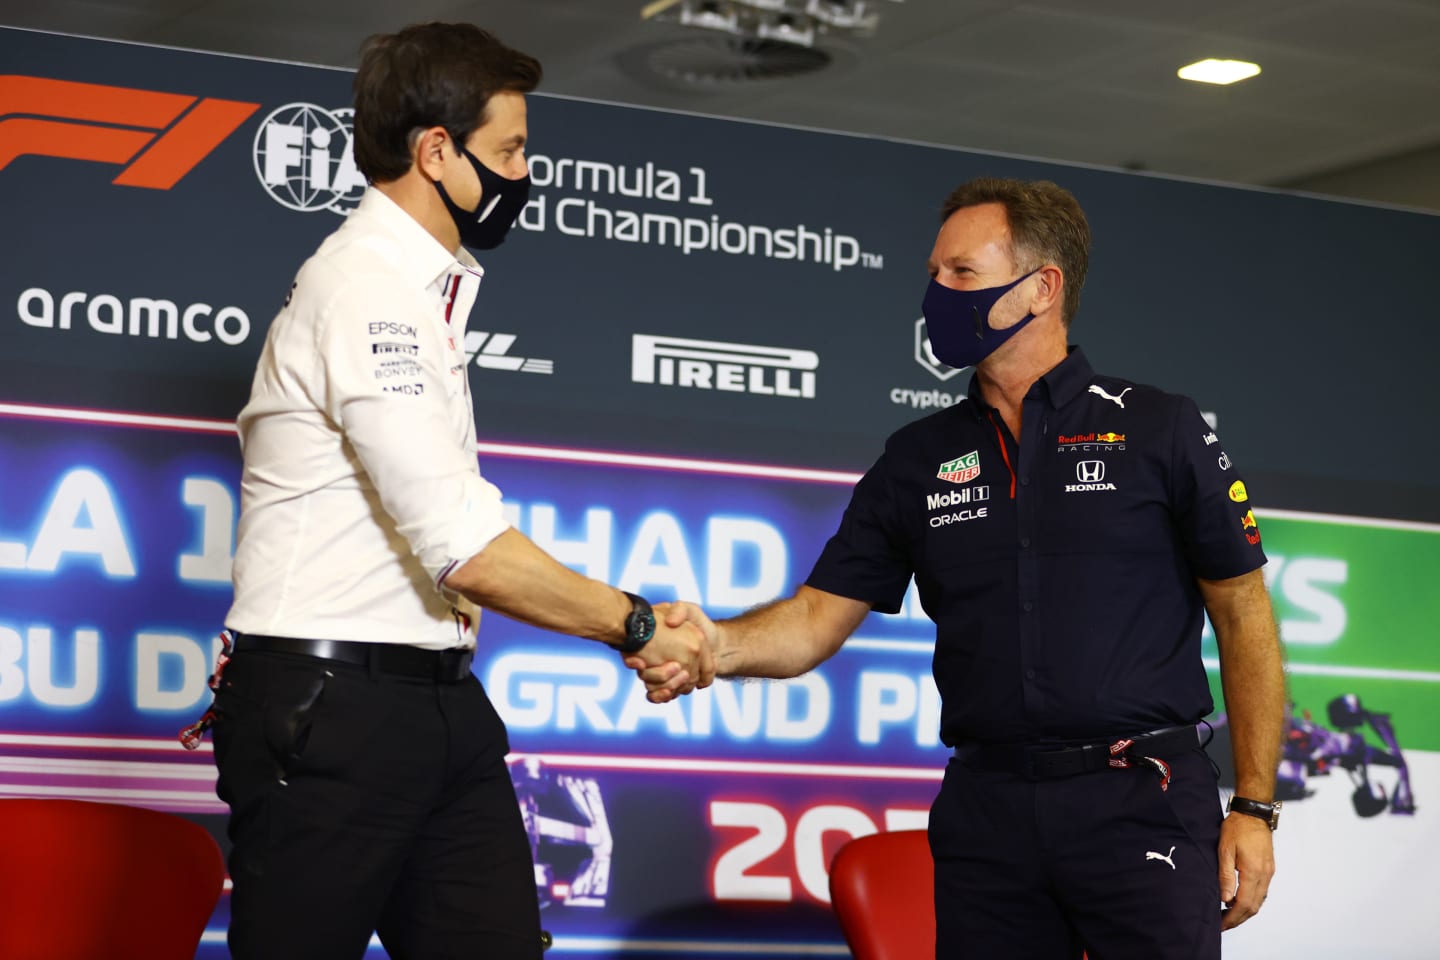 ABU DHABI, UNITED ARAB EMIRATES - DECEMBER 10: Mercedes GP Executive Director Toto Wolff and Red Bull Racing Team Principal Christian Horner shake hands in the team principals press conference ahead of the F1 Grand Prix of Abu Dhabi at Yas Marina Circuit on December 10, 2021 in Abu Dhabi, United Arab Emirates. (Photo by Bryn Lennon/Getty Images)